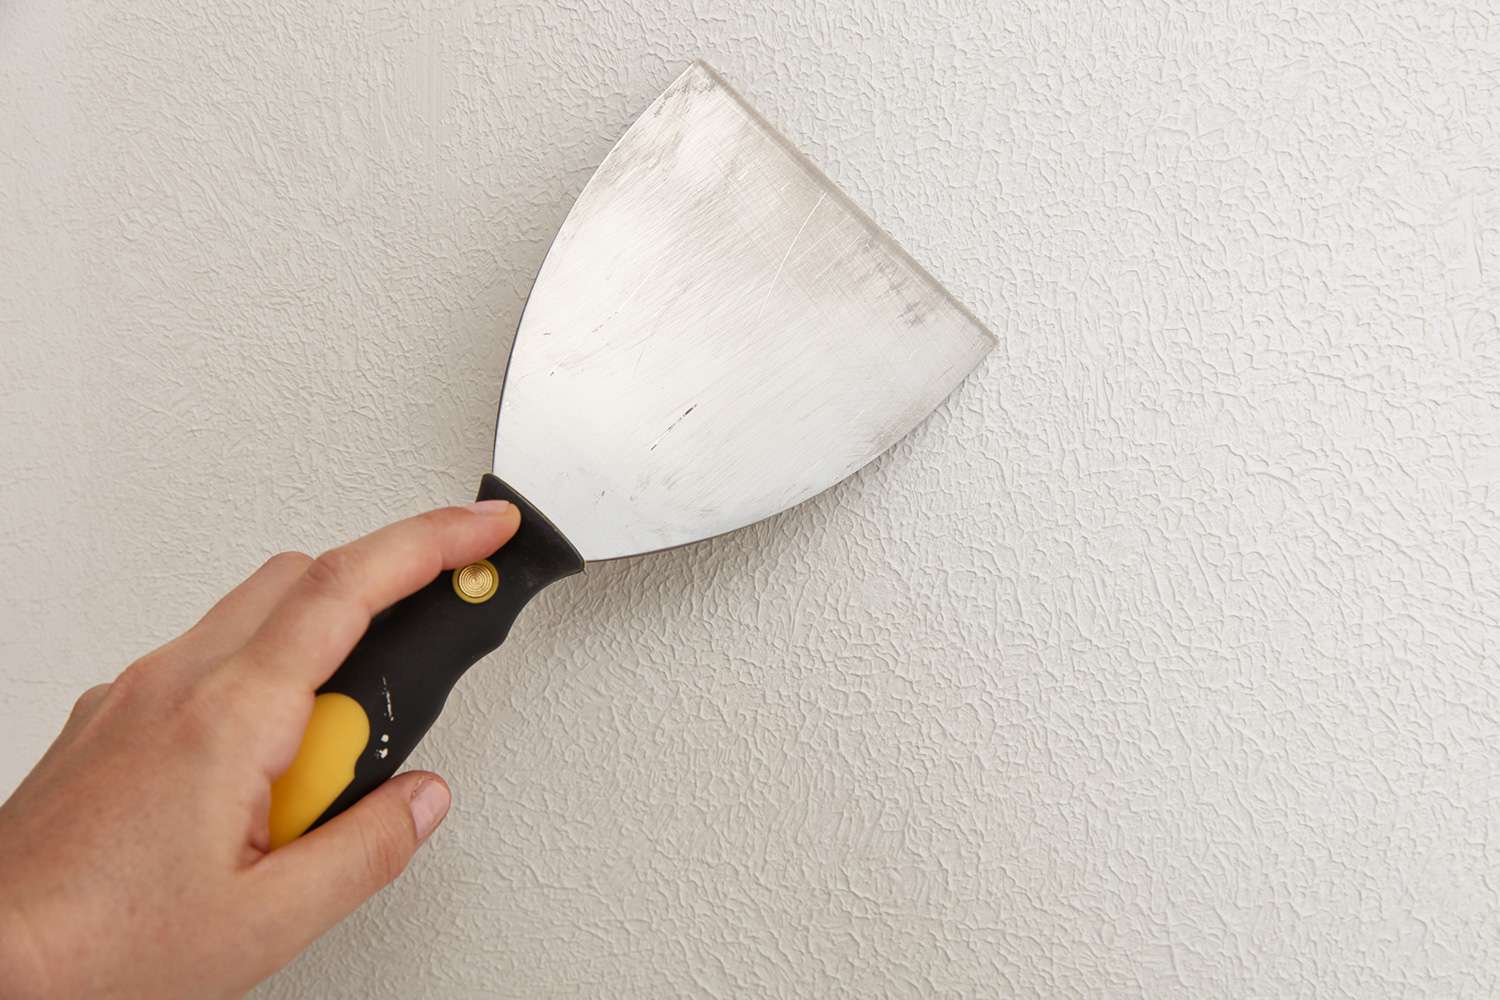 Use drywall knife to smooth out the textured surface